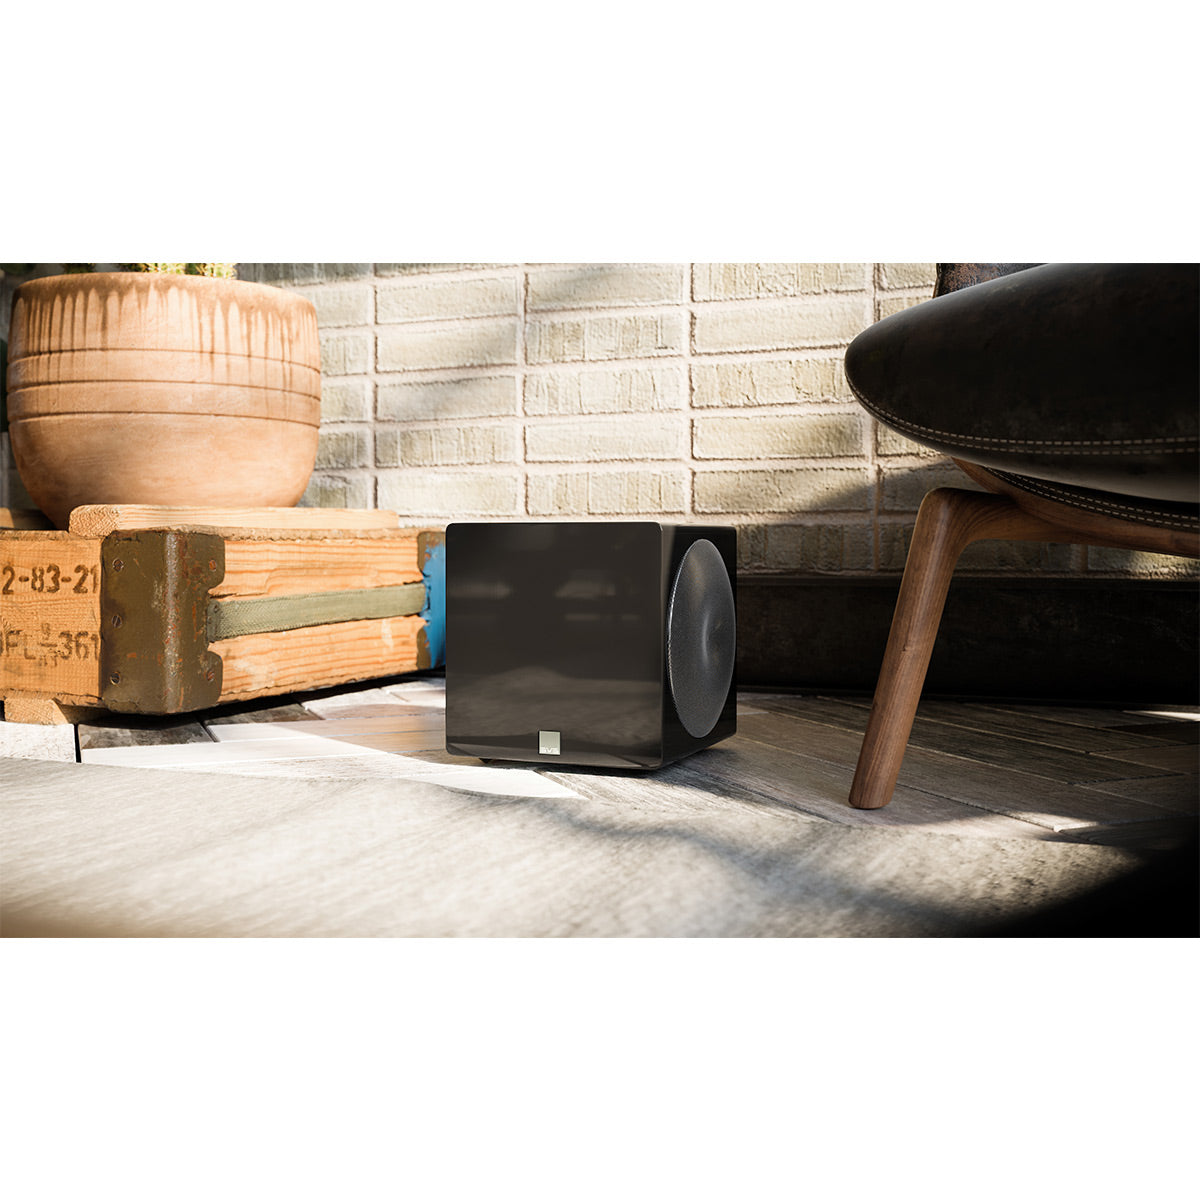 SVS 3000 Micro Sealed Subwoofers with Fully Active Dual 8-inch Drivers - Pair (Piano Gloss Black)